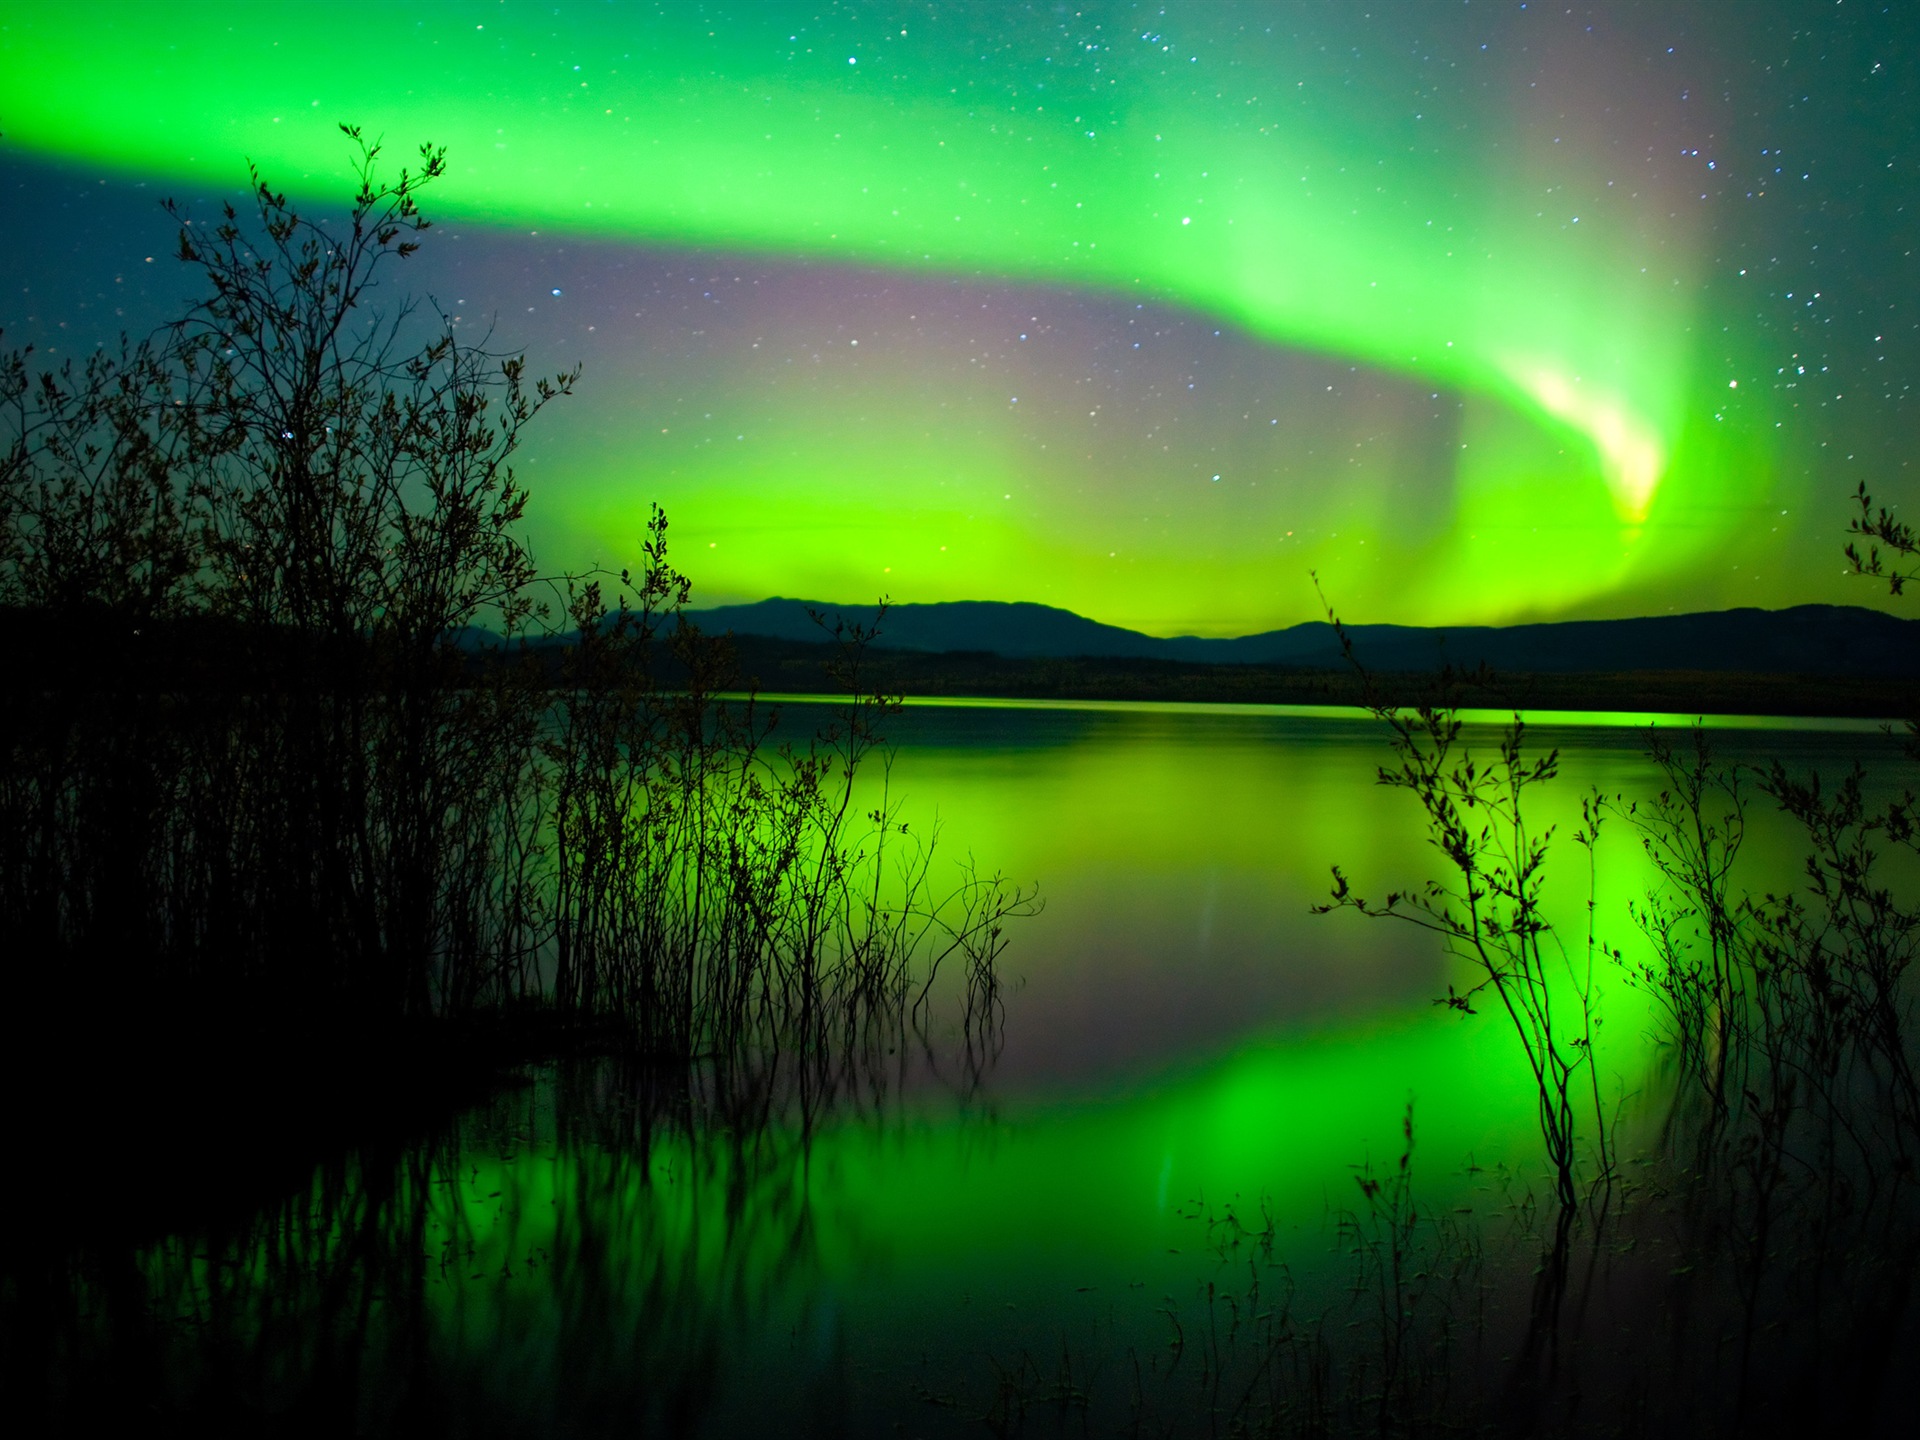 Natural wonders of the Northern Lights HD Wallpaper (2) #12 - 1920x1440